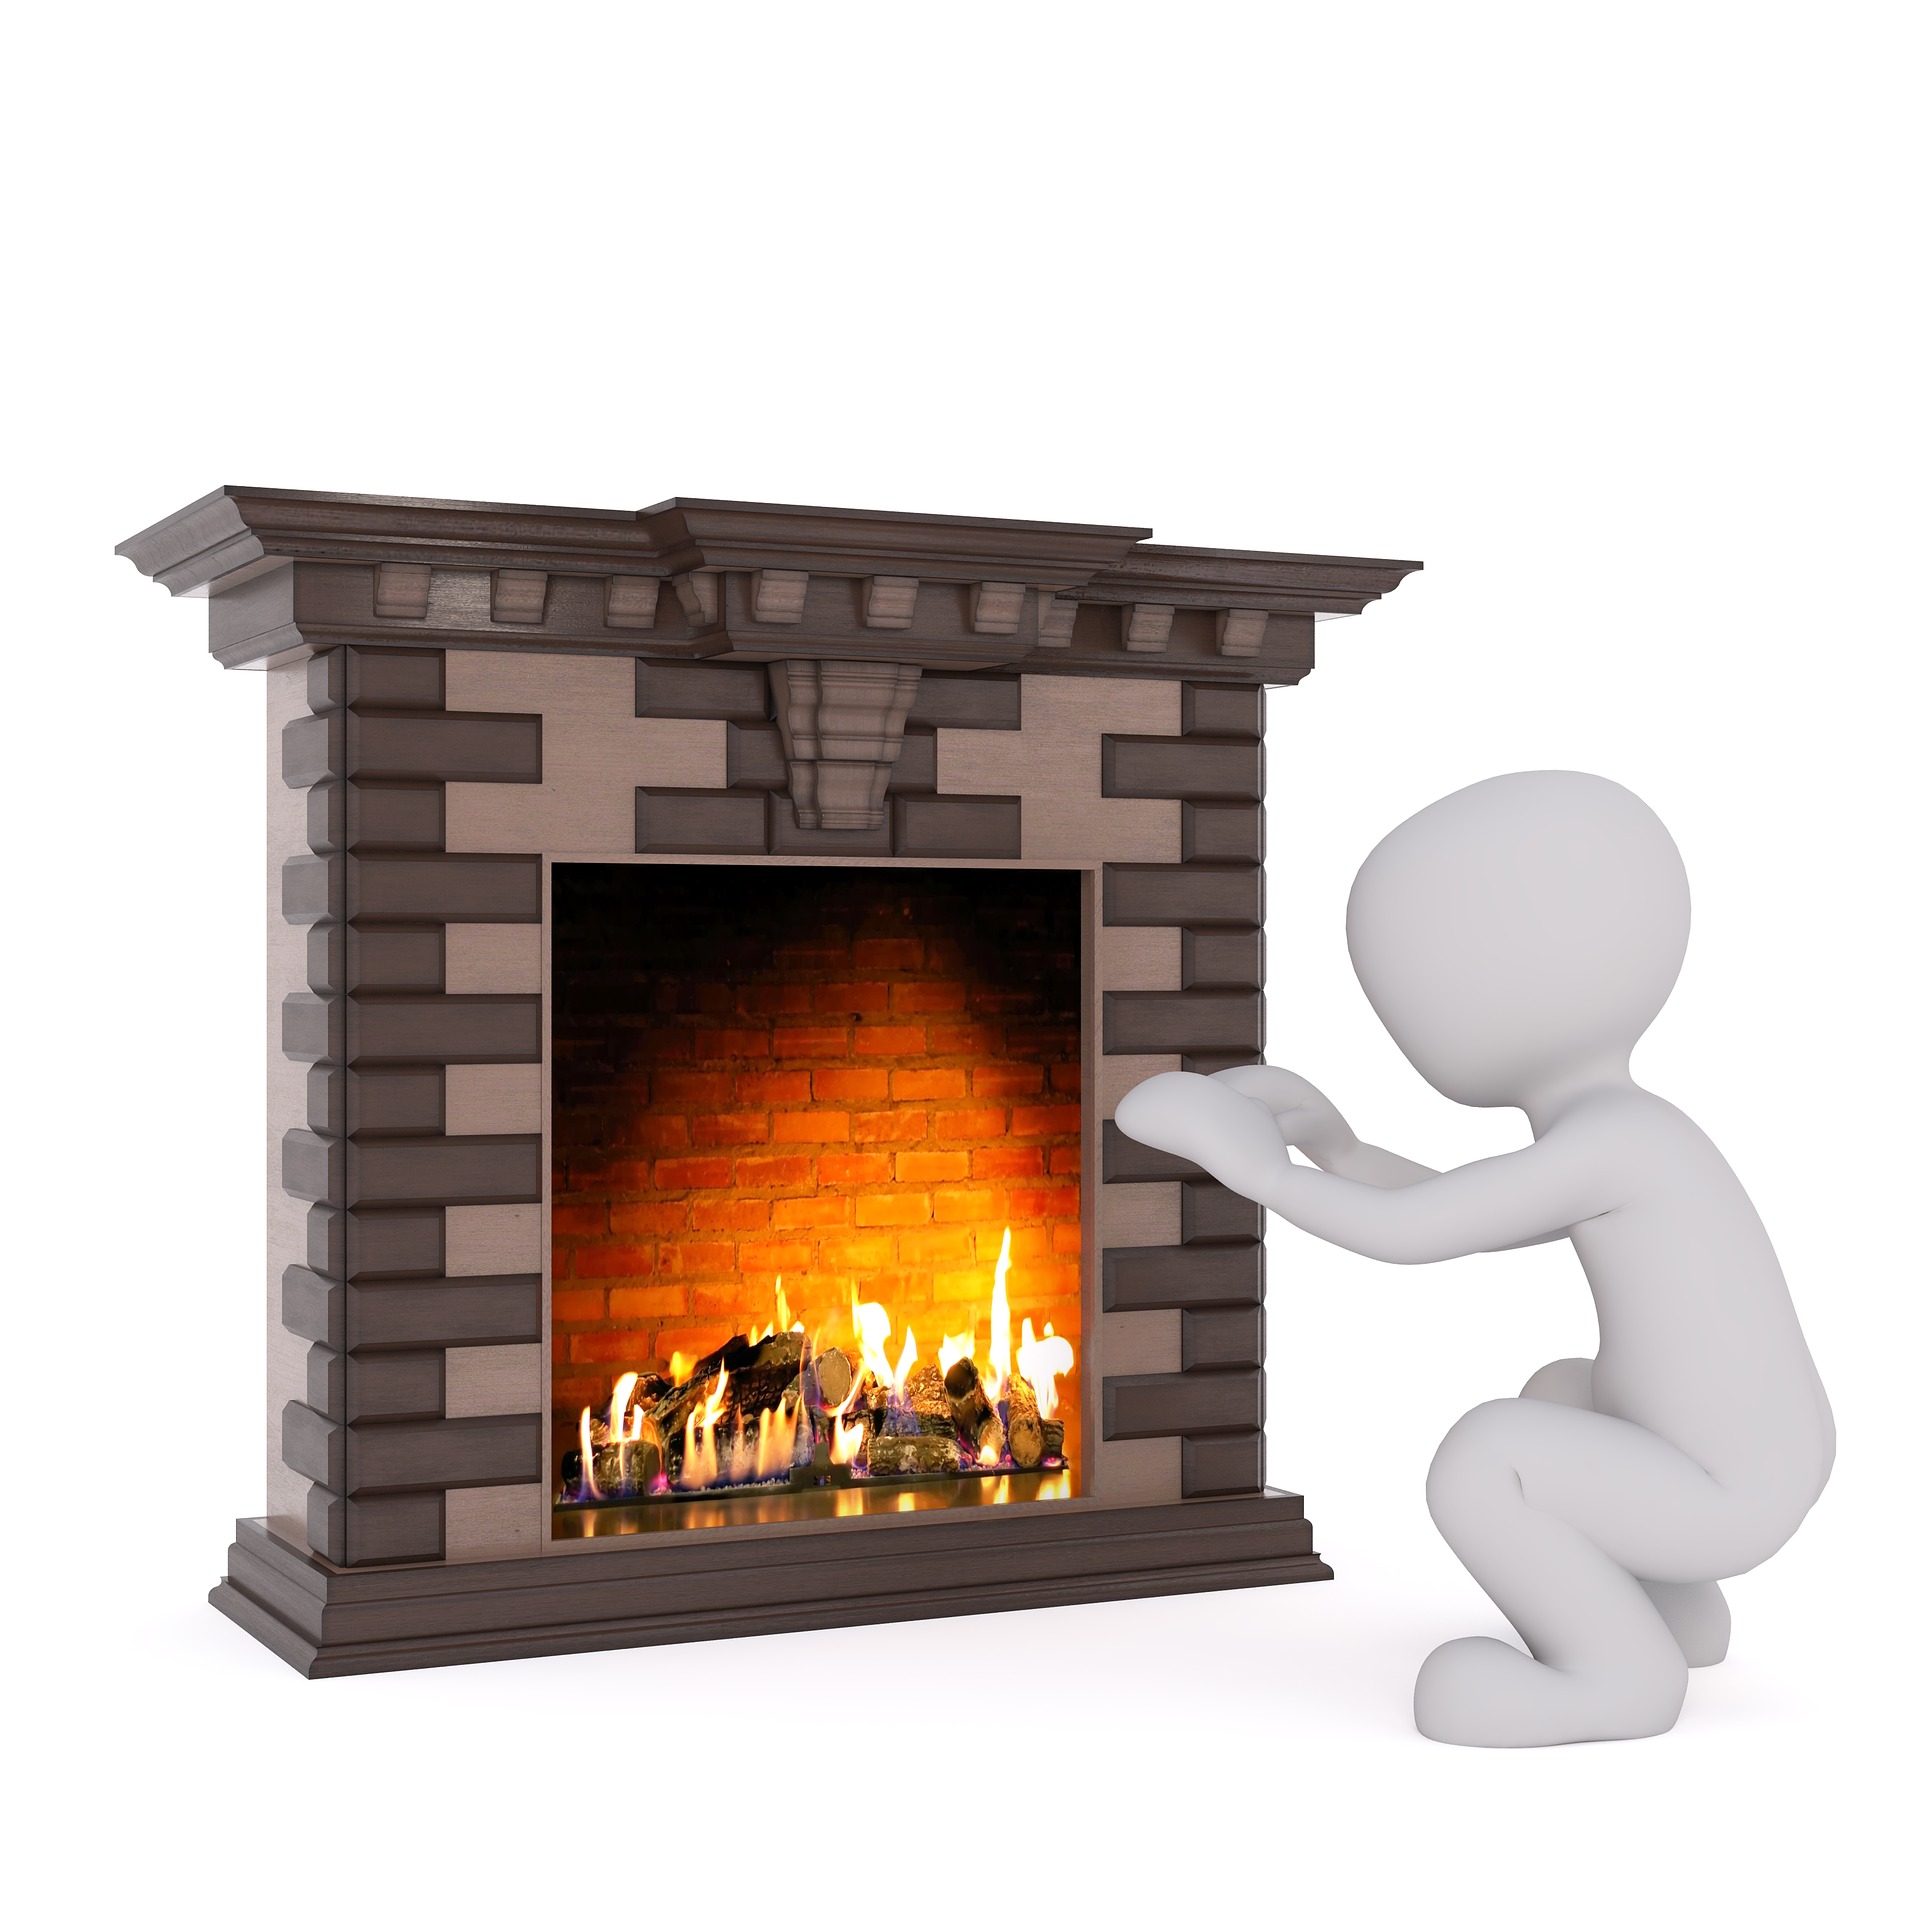 The Performance and Efficiency of Mini Wood Stoves